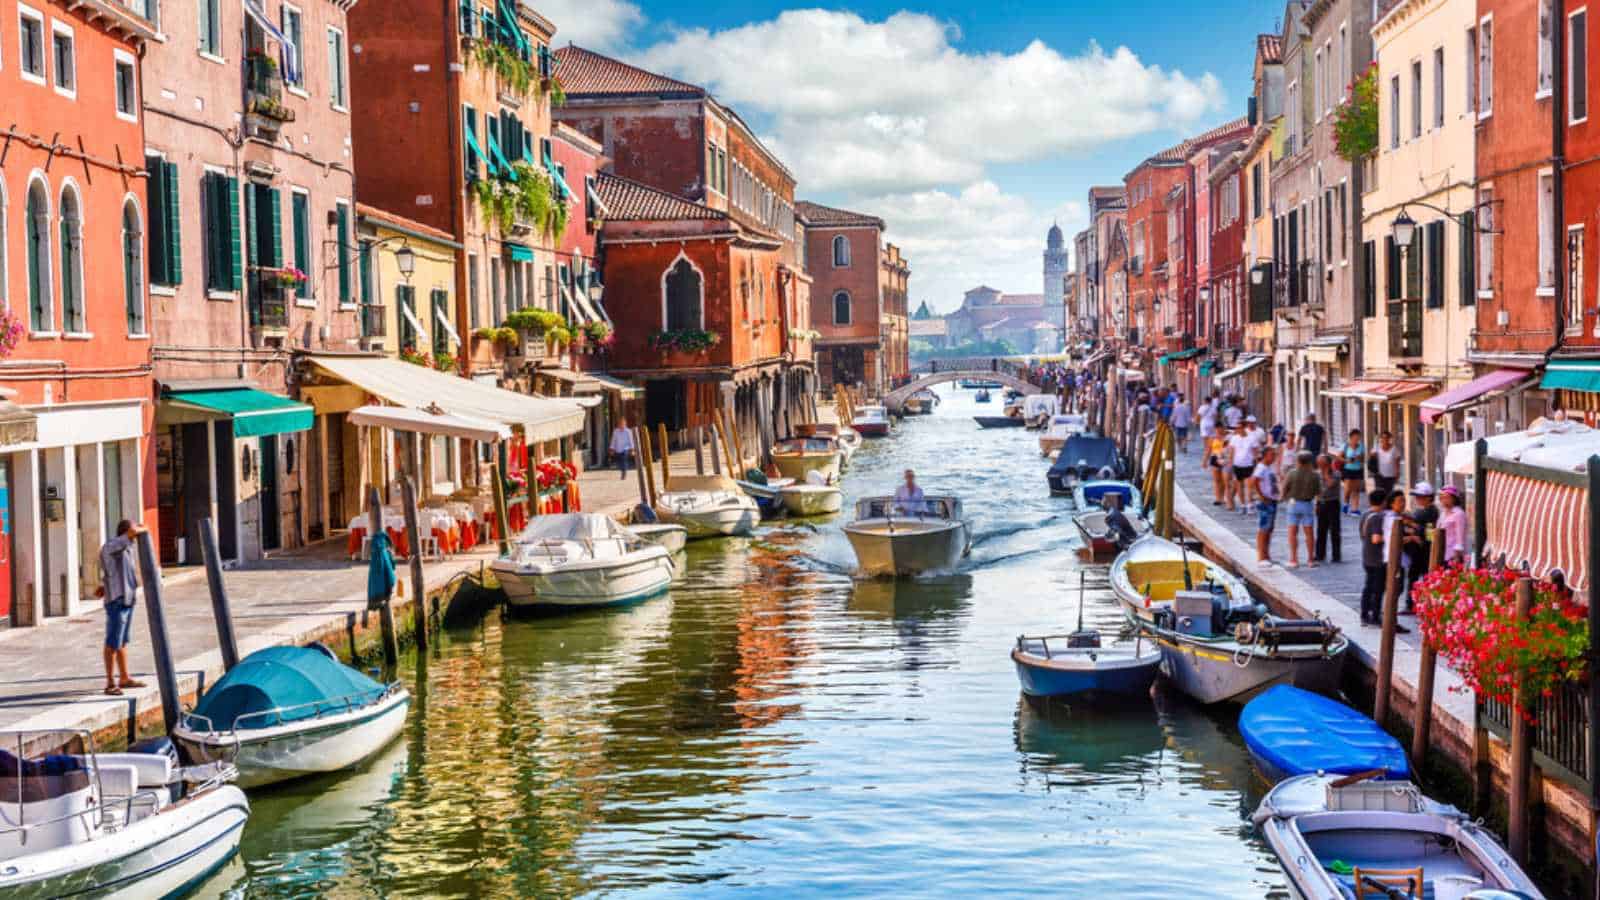 Island murano in Venice Italy. View on canal with boat and motorboat water. Picturesque landscape.